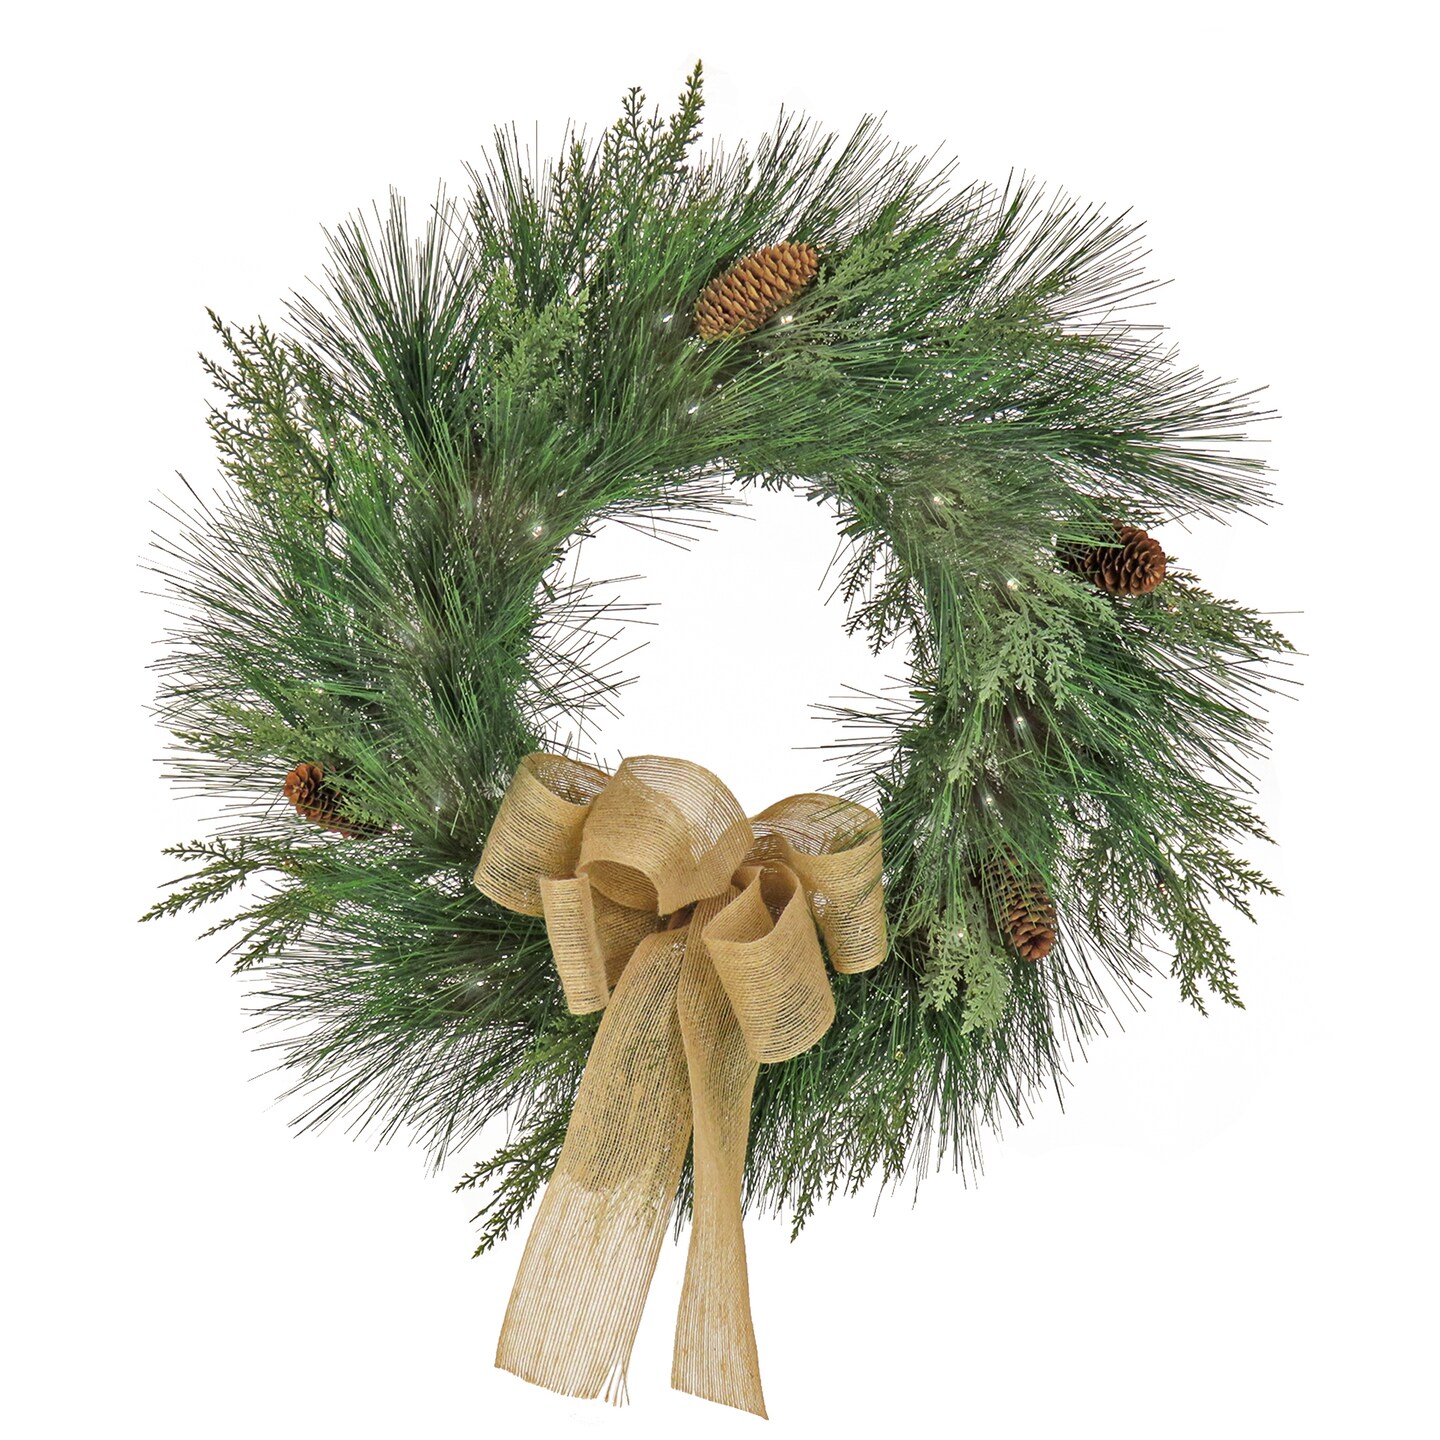 HOT* Michaels Christmas Decor Deals: Wreath and Wrapping Supplies